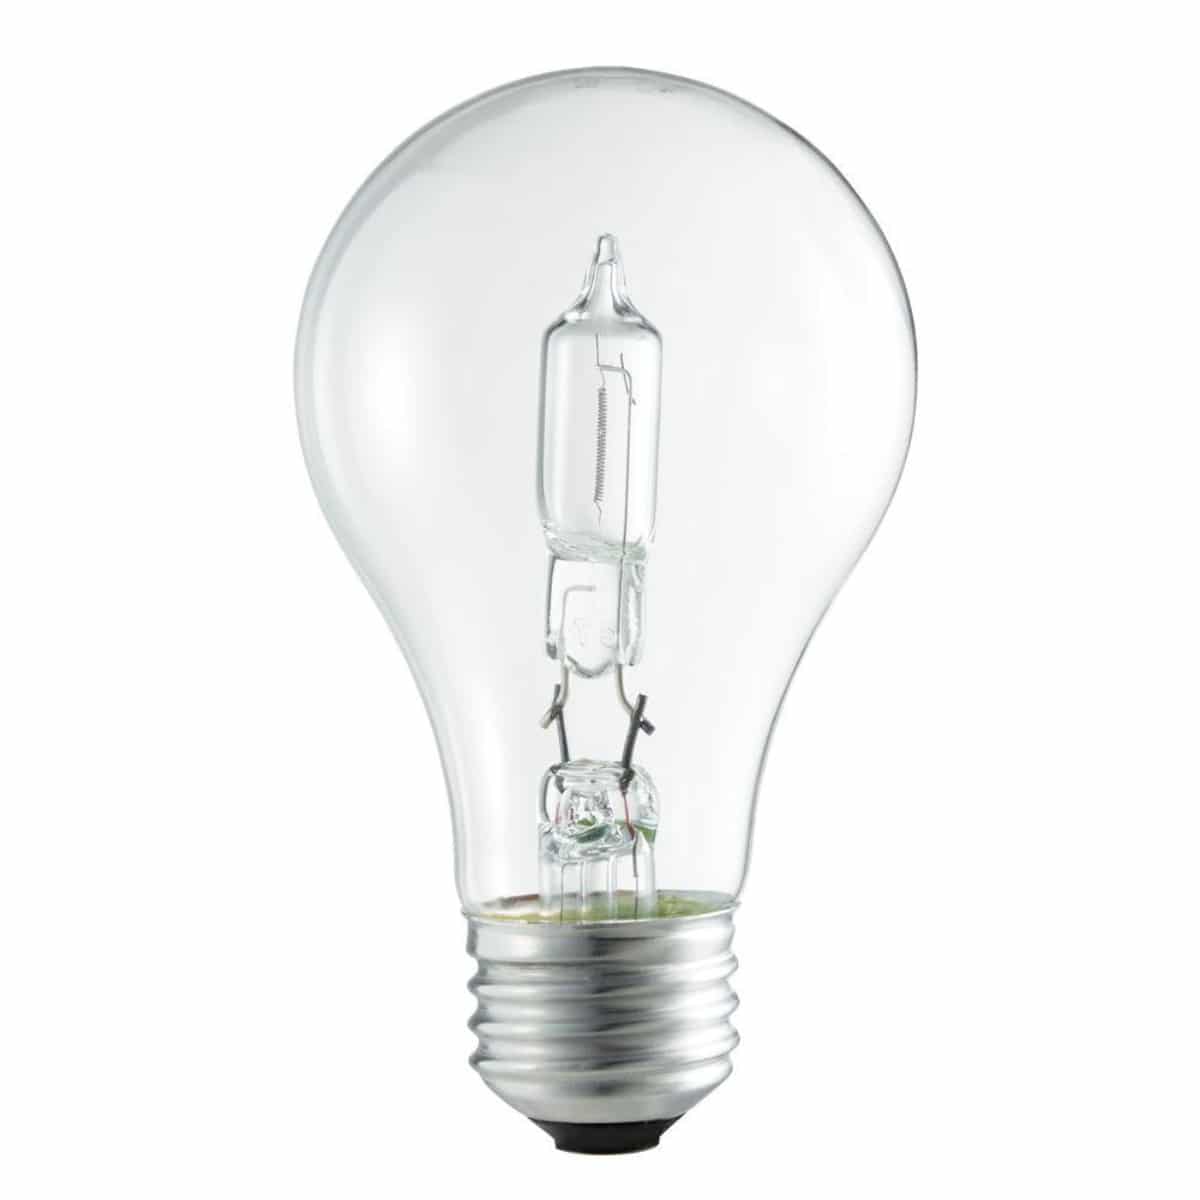 How To Choose The Right Light Bulb For, How To Dispose Of Used Light Bulbs Uk